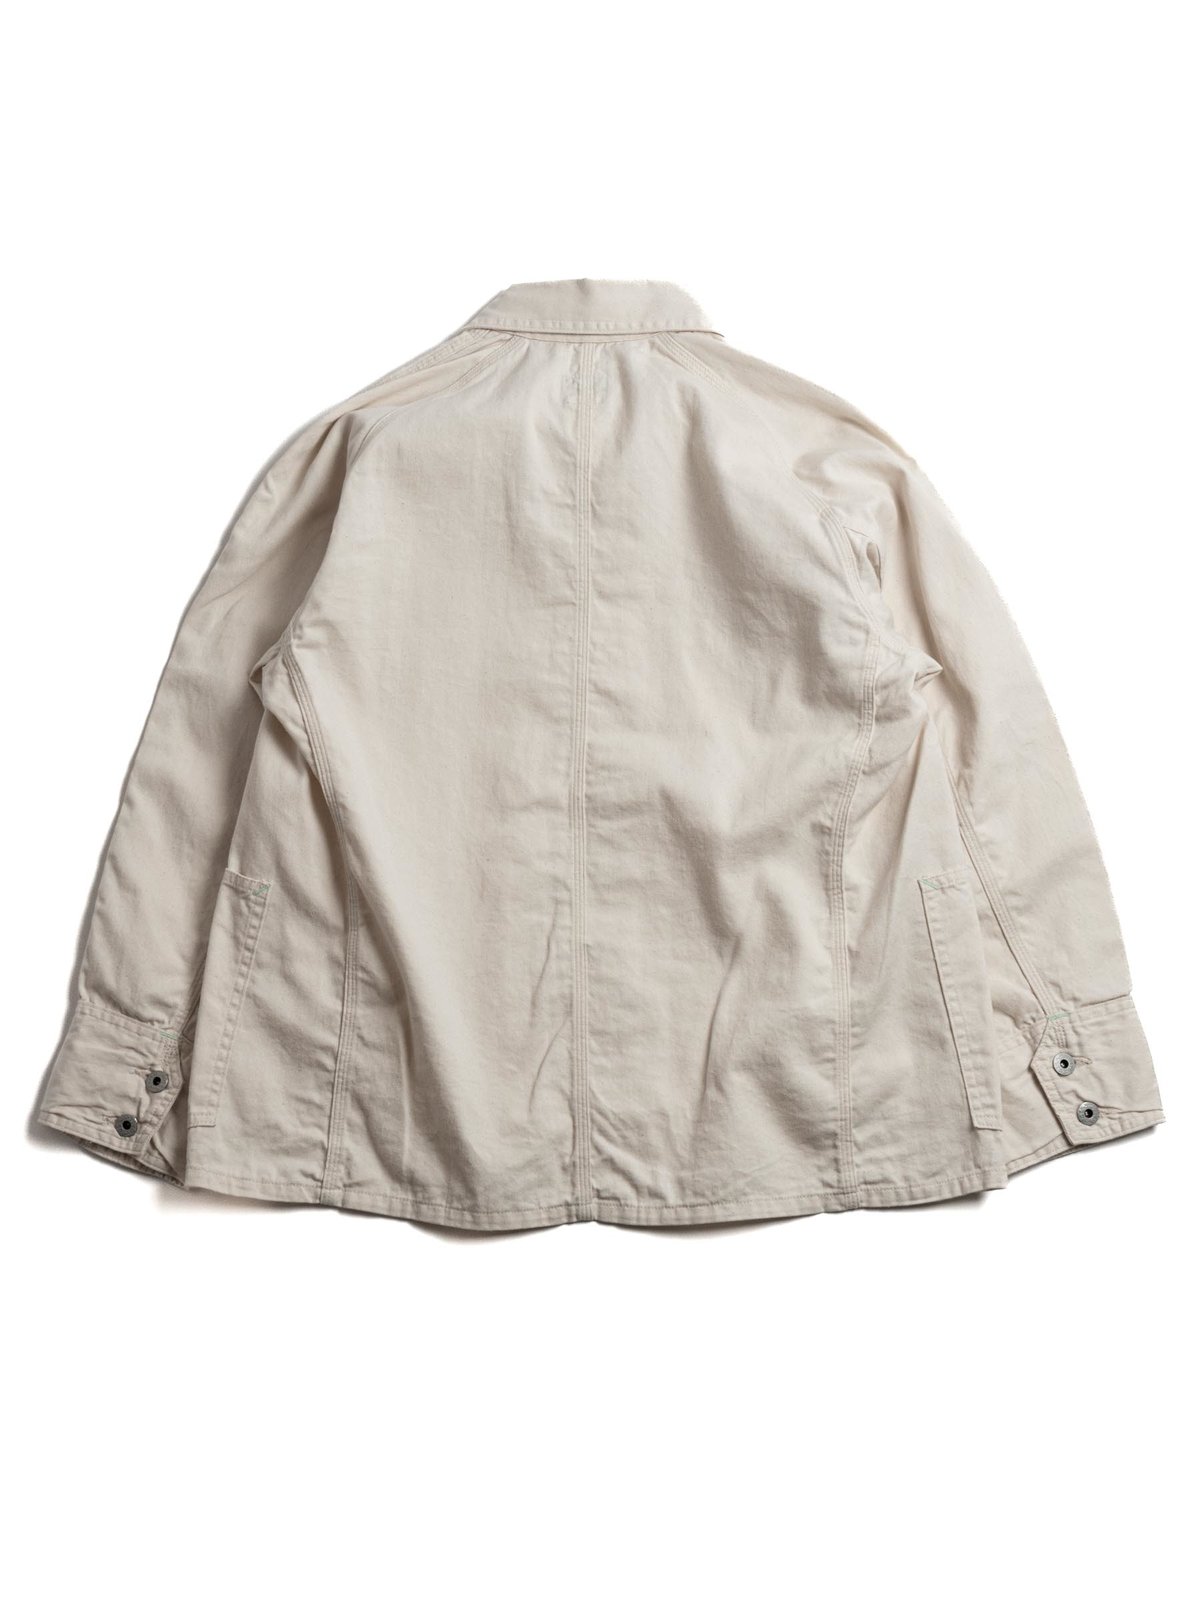 ENGINEER’S JACKET COTTON DRILL NATURAL - Image 4